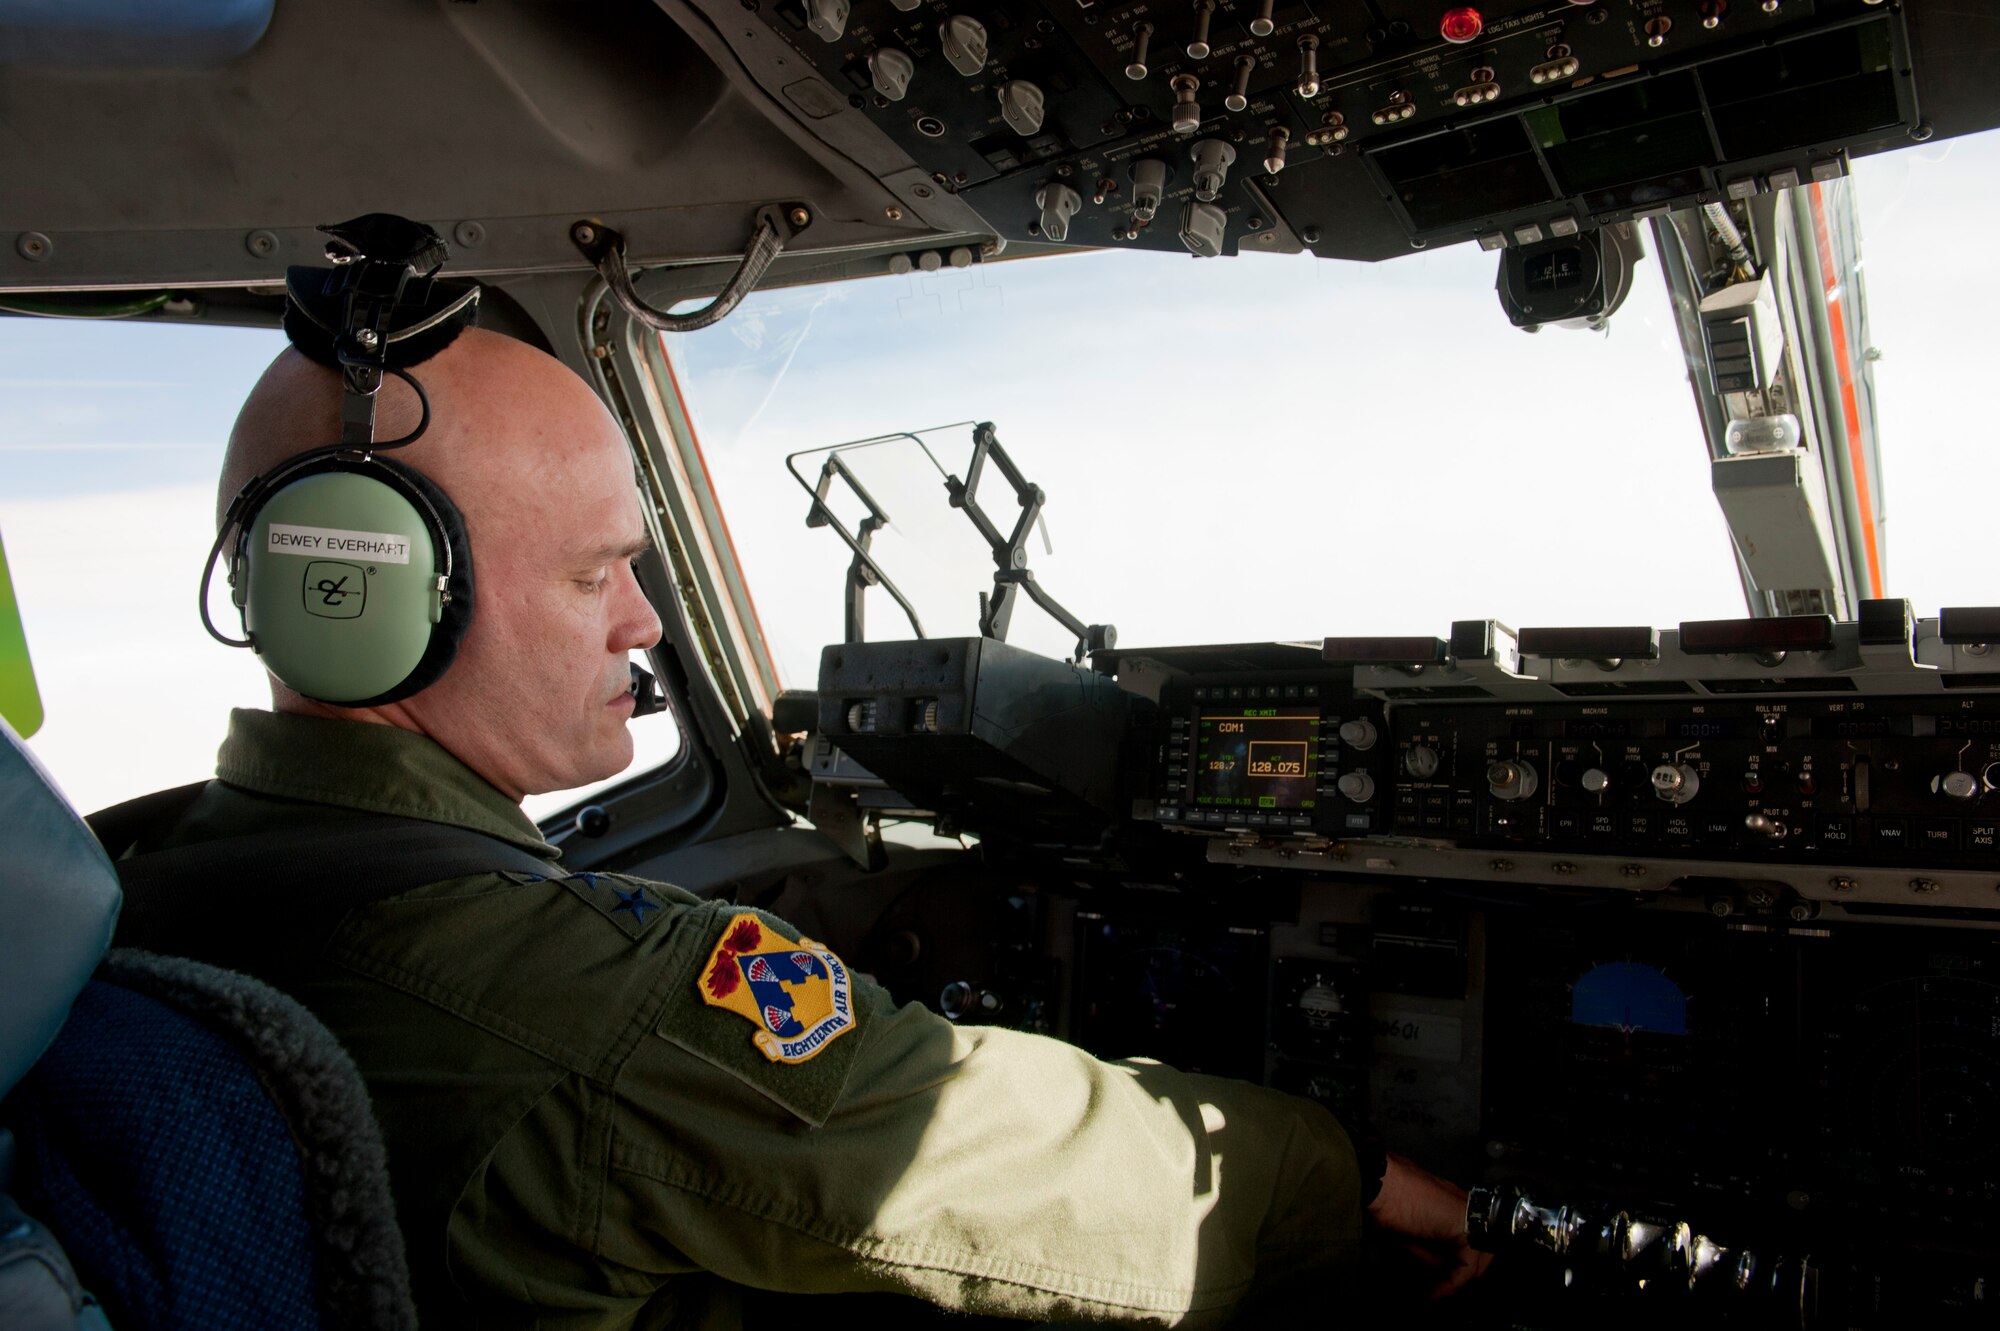 Lt. Gen. Carlton Everhart, 18th Air Force commander, pilots a C-17 Globemaster III en route to the Nevada Test and Training Range during the U.S. Air Force Weapons School's Joint Forcible Entry Exercise 14B Dec. 6, 2014. JFEX is a U.S. Air Force Weapons School large-scale air mobility exercise that tests participants’ ability to synchronize aircraft movements from geographically separated bases. (U.S. Air Force photo by Senior Airman Thomas Spangler)